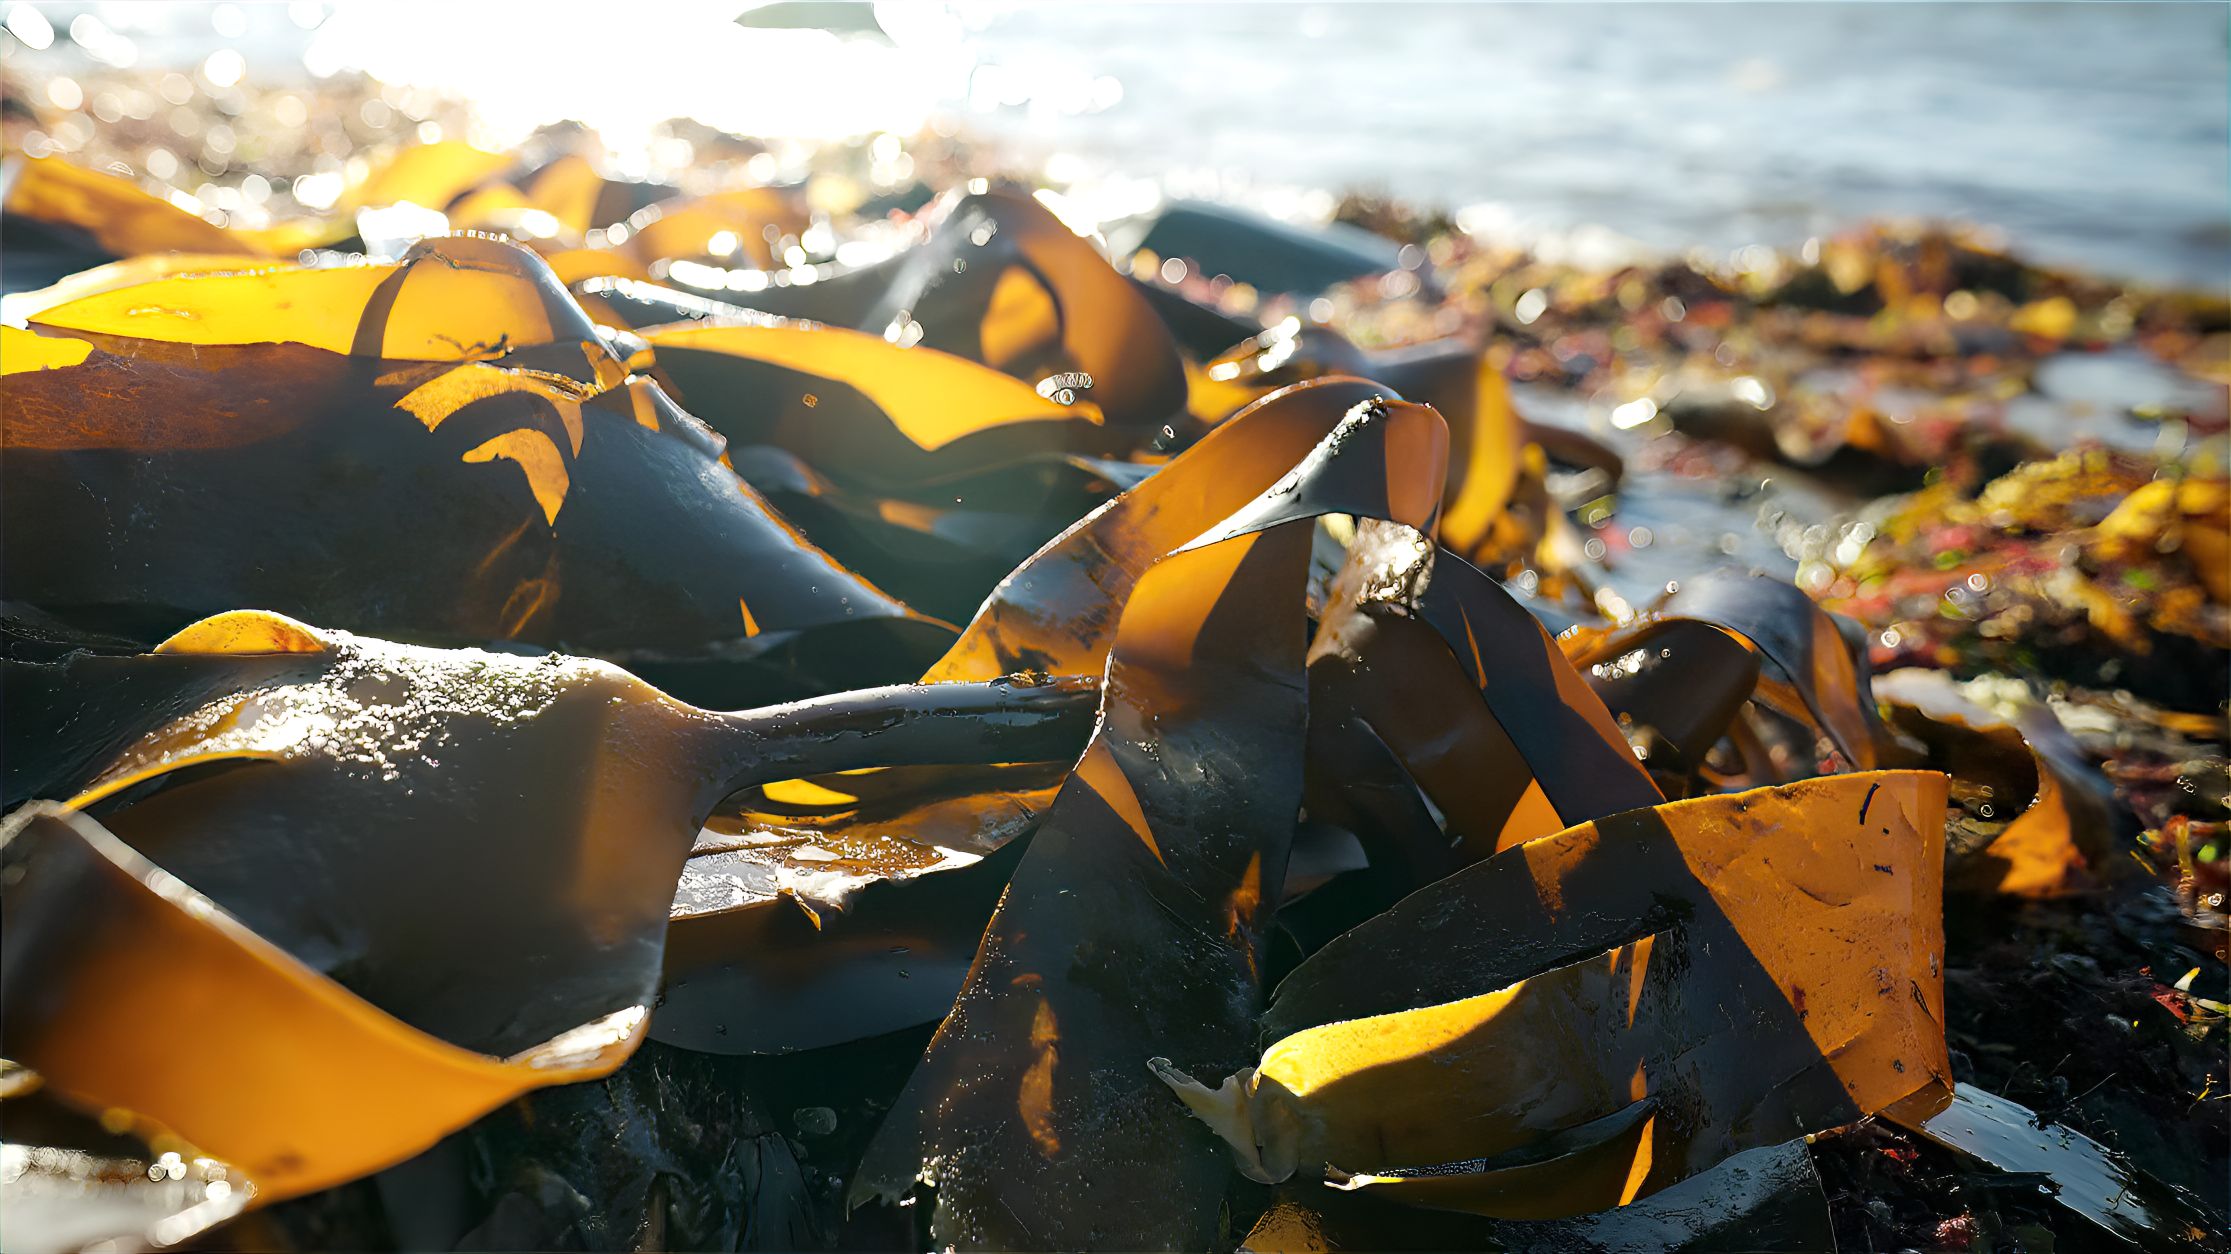 A photograph showing kelp washed up at the shore.